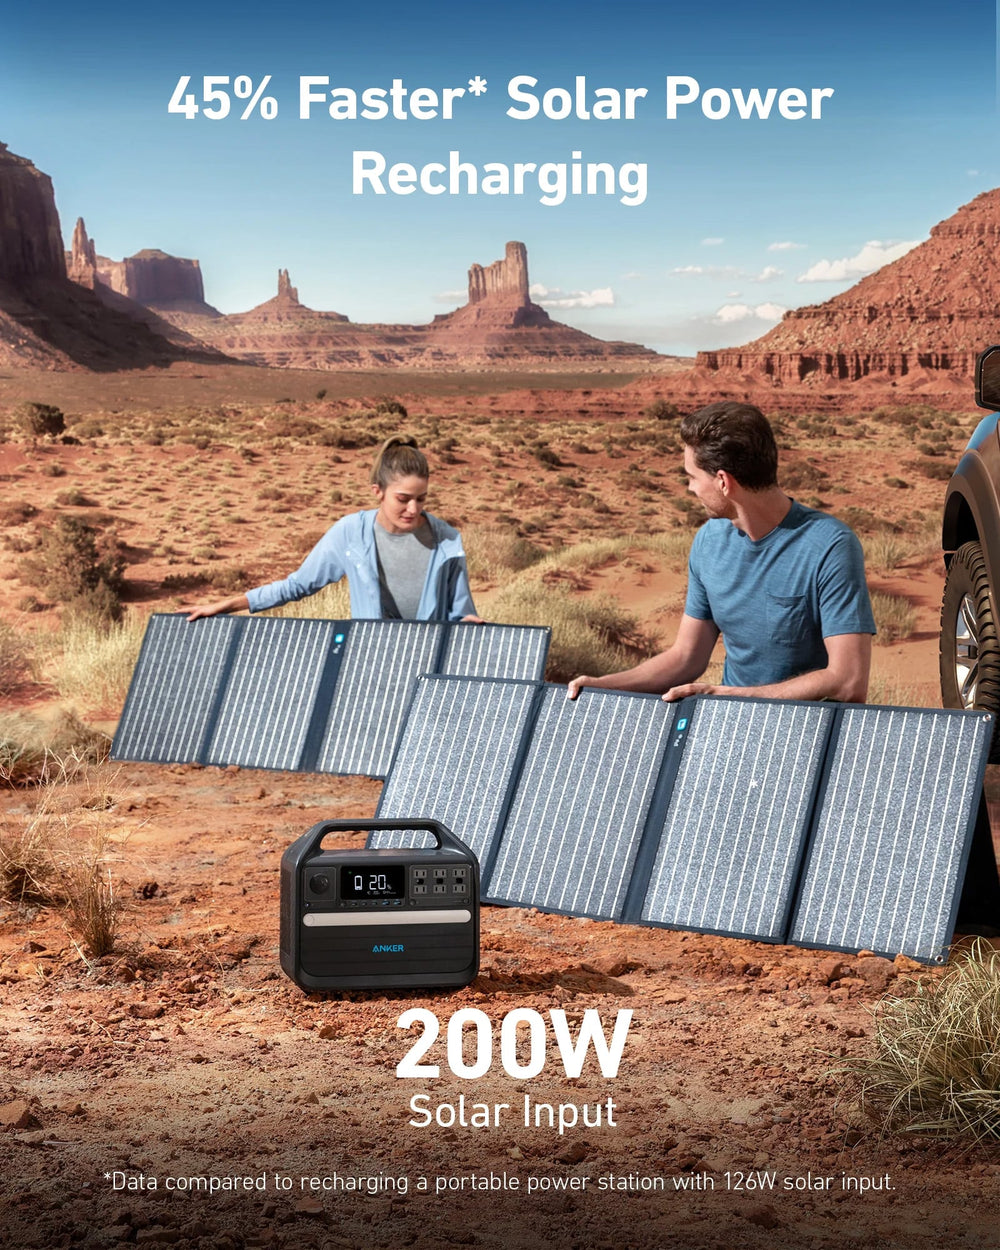 Experience Fast Solar Recharging With The Anker 200W Solar Panels